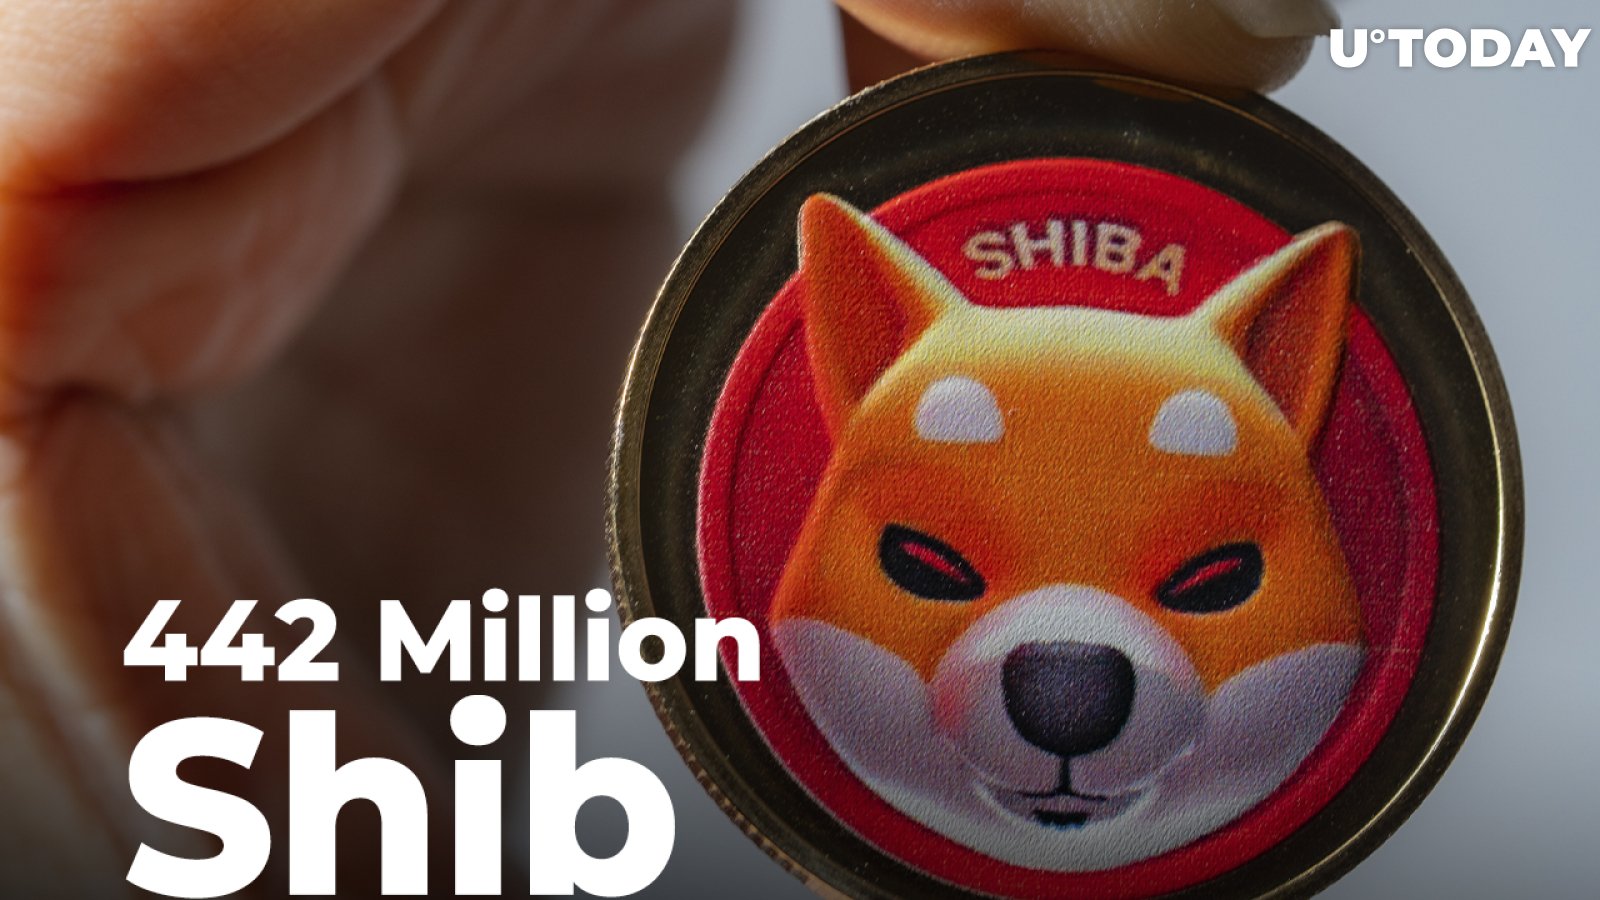 442 Million Shiba Inu Burned in Past 3 Days, While SHIB Shows 11% Weekly Drop